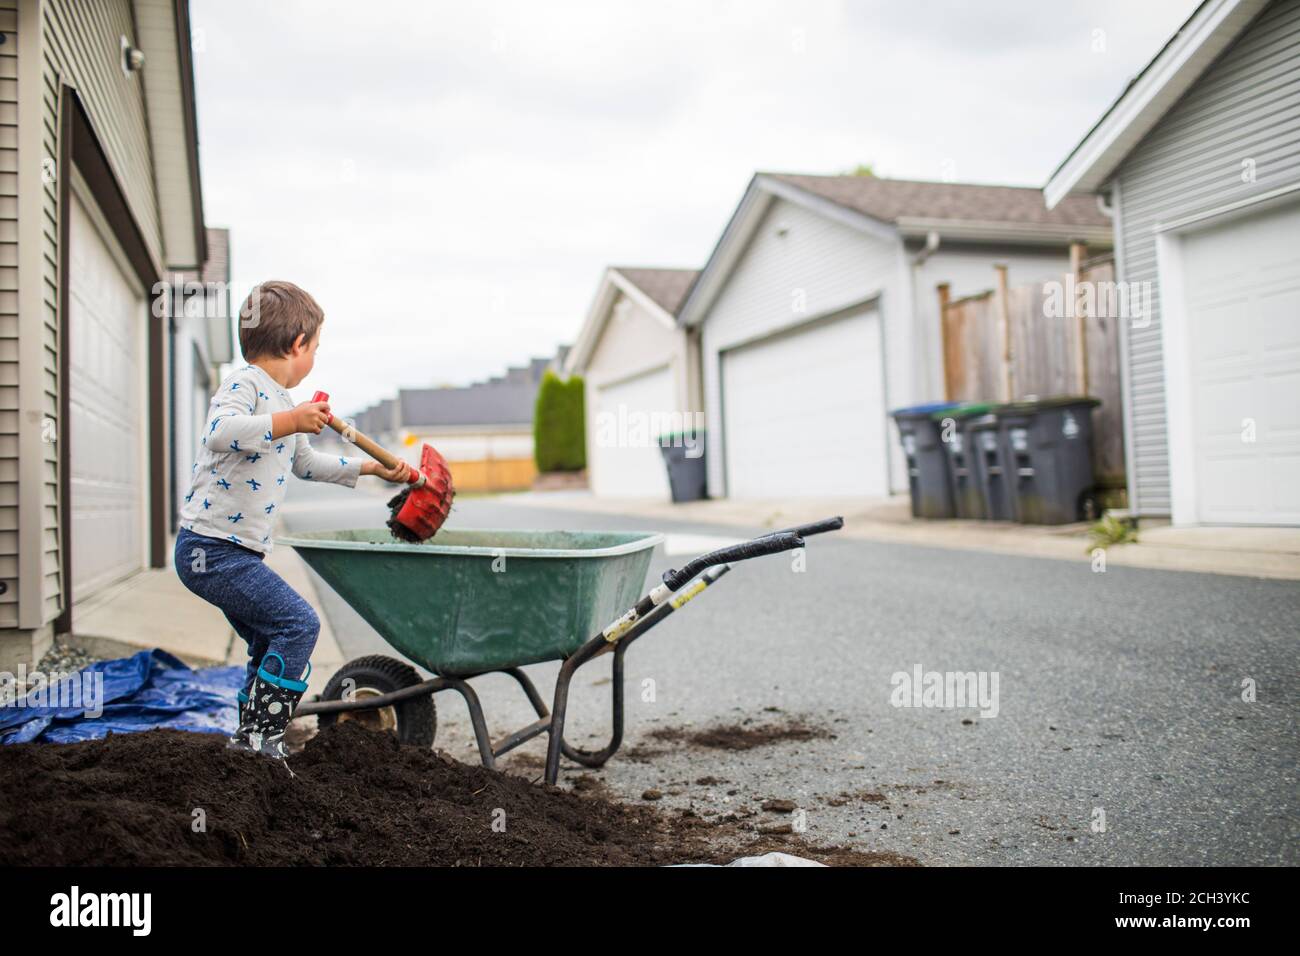 Young boy scooping pile of soil into wheelbarrow in back alley Stock Photo